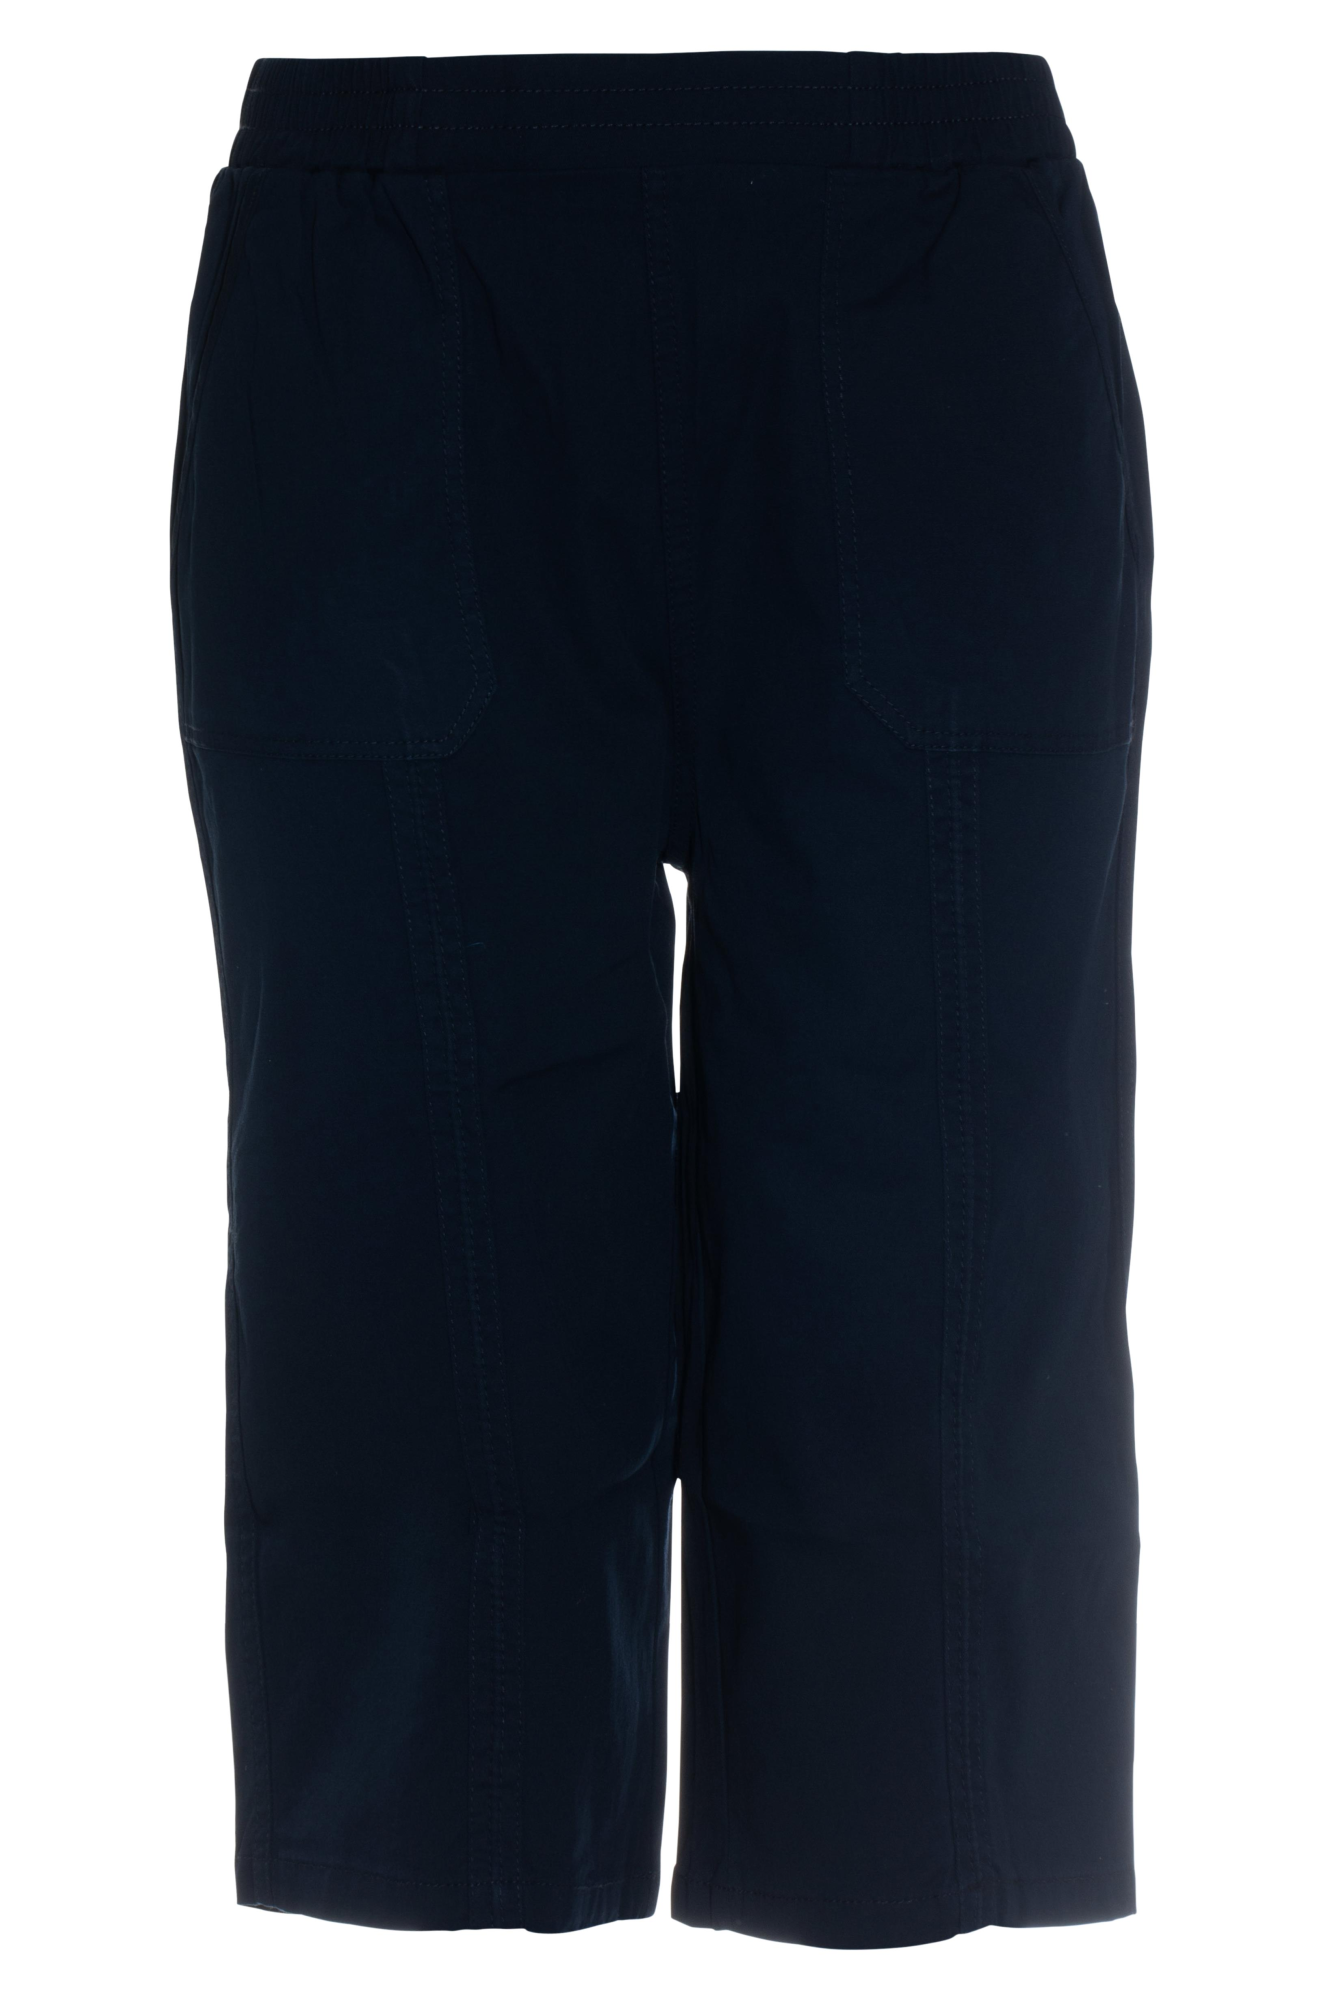 Pull on Below Knee Pants | NAVY | 6815YY – Ballentynes Fashion Central